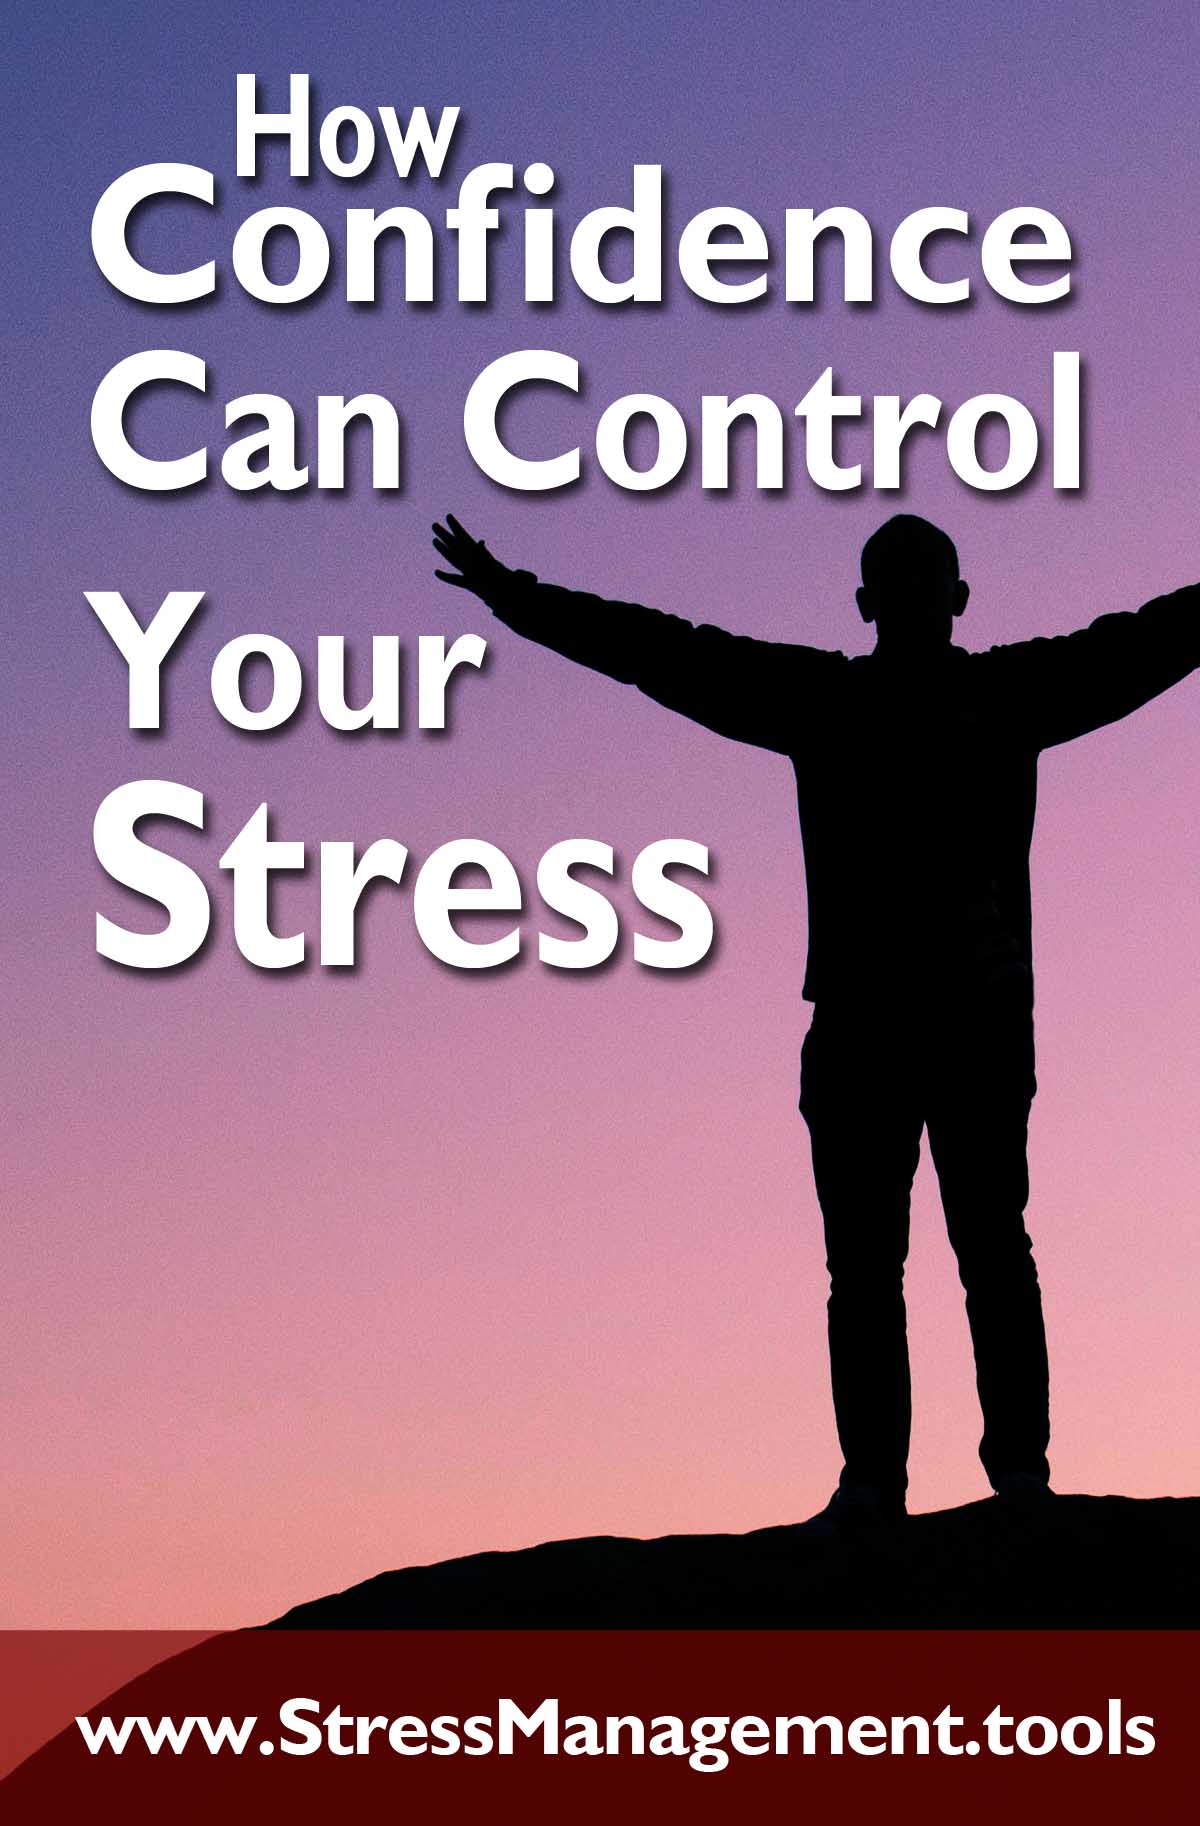 How Confidence Can Control Your Stress